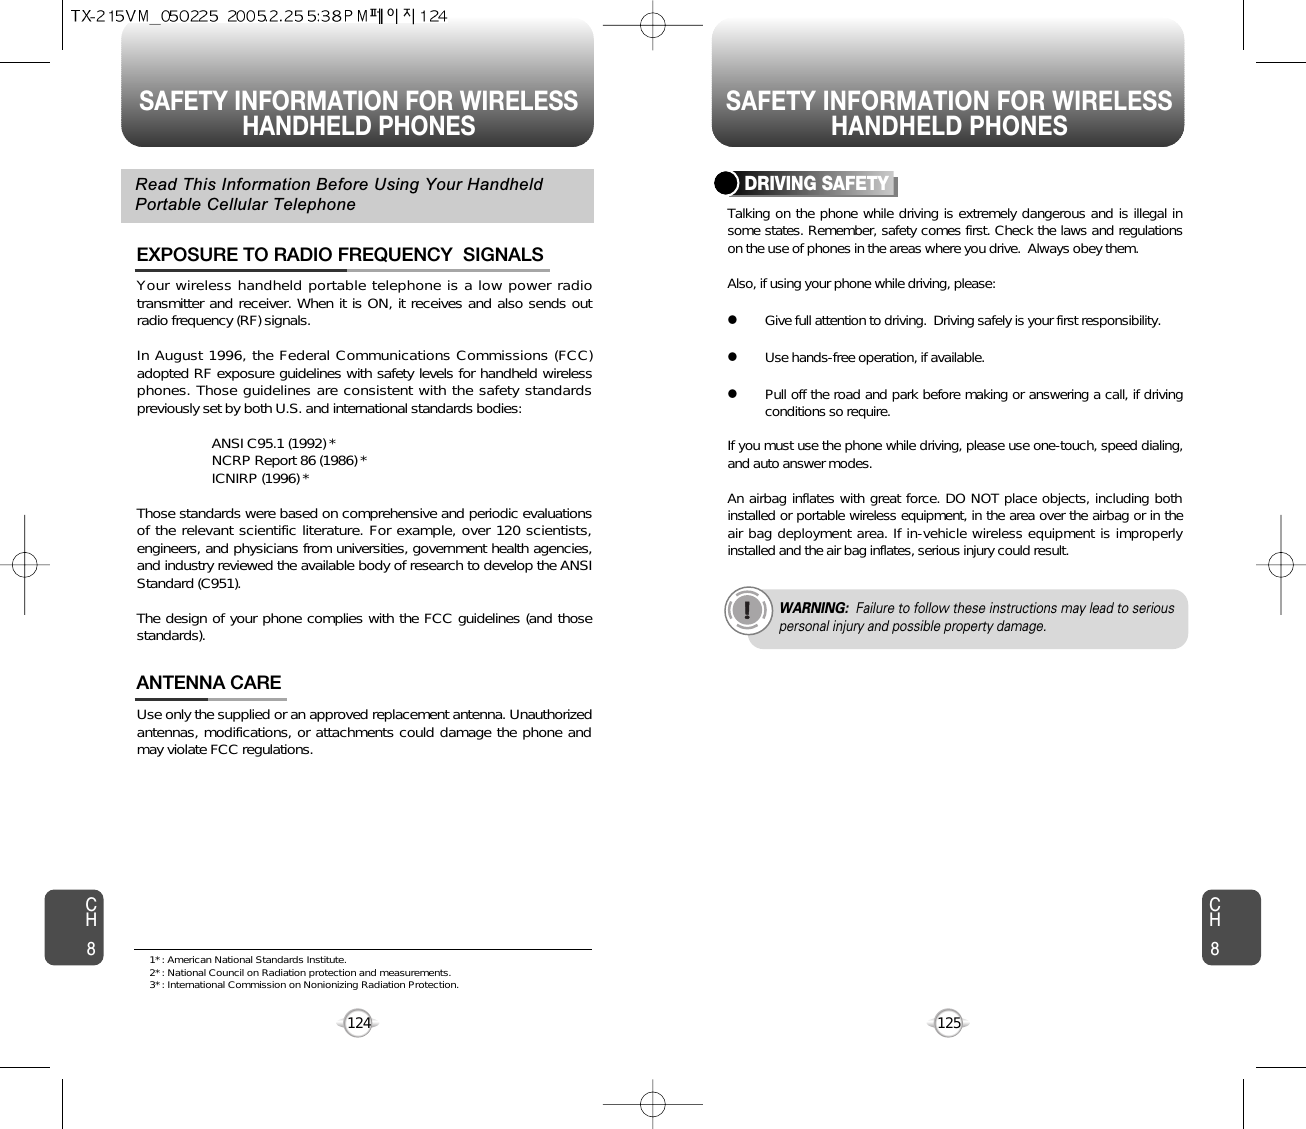 SAFETY INFORMATION FOR WIRELESSHANDHELD PHONES SAFETY INFORMATION FOR WIRELESSHANDHELD PHONES125CH8CH8124Your wireless handheld portable telephone is a low power radiotransmitter and receiver. When it is ON, it receives and also sends outradio frequency (RF) signals.In August 1996, the Federal Communications Commissions (FCC)adopted RF exposure guidelines with safety levels for handheld wirelessphones. Those guidelines are consistent with the safety standardspreviously set by both U.S. and international standards bodies:ANSI C95.1 (1992) *NCRP Report 86 (1986) *ICNIRP (1996) *Those standards were based on comprehensive and periodic evaluationsof the relevant scientific literature. For example, over 120 scientists,engineers, and physicians from universities, government health agencies,and industry reviewed the available body of research to develop the ANSIStandard (C951).The design of your phone complies with the FCC guidelines (and thosestandards).EXPOSURE TO RADIO FREQUENCY  SIGNALSUse only the supplied or an approved replacement antenna. Unauthorizedantennas, modifications, or attachments could damage the phone andmay violate FCC regulations.ANTENNA CARERead This Information Before Using Your HandheldPortable Cellular TelephoneTalking on the phone while driving is extremely dangerous and is illegal insome states. Remember, safety comes first. Check the laws and regulationson the use of phones in the areas where you drive.  Always obey them.Also, if using your phone while driving, please:lGive full attention to driving.  Driving safely is your first responsibility.lUse hands-free operation, if available.lPull off the road and park before making or answering a call, if drivingconditions so require.If you must use the phone while driving, please use one-touch, speed dialing,and auto answer modes.An airbag inflates with great force. DO NOT place objects, including bothinstalled or portable wireless equipment, in the area over the airbag or in theair bag deployment area. If in-vehicle wireless equipment is improperlyinstalled and the air bag inflates, serious injury could result.DRIVING SAFETYWARNING: Failure to follow these instructions may lead to seriouspersonal injury and possible property damage.1* : American National Standards Institute.2* : National Council on Radiation protection and measurements. 3* : International Commission on Nonionizing Radiation Protection.